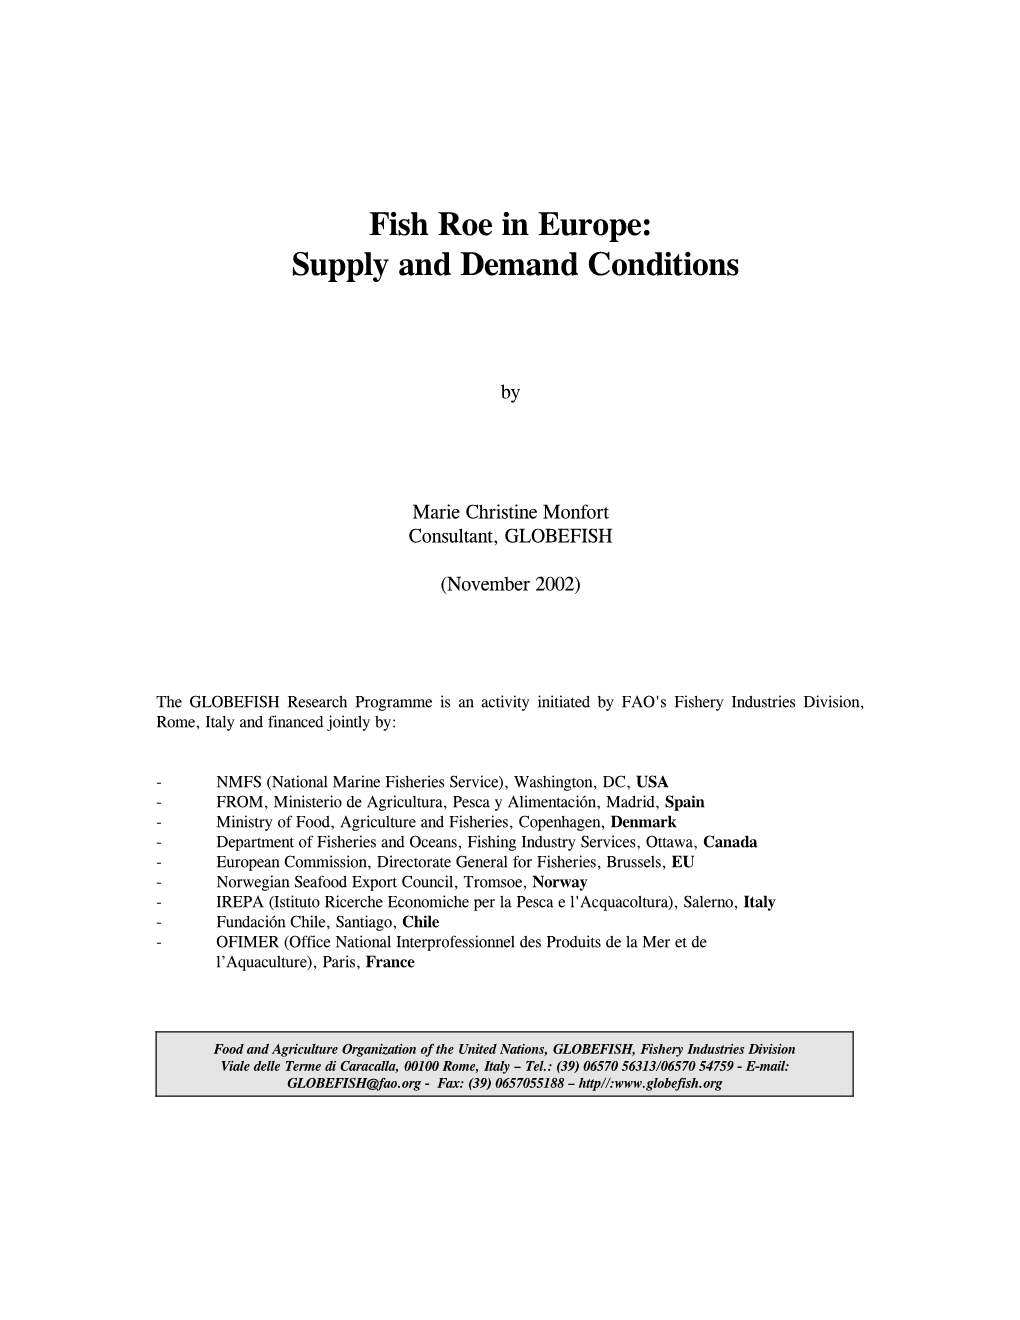 Fish Roes in Europe: Supply and Demand Conditions